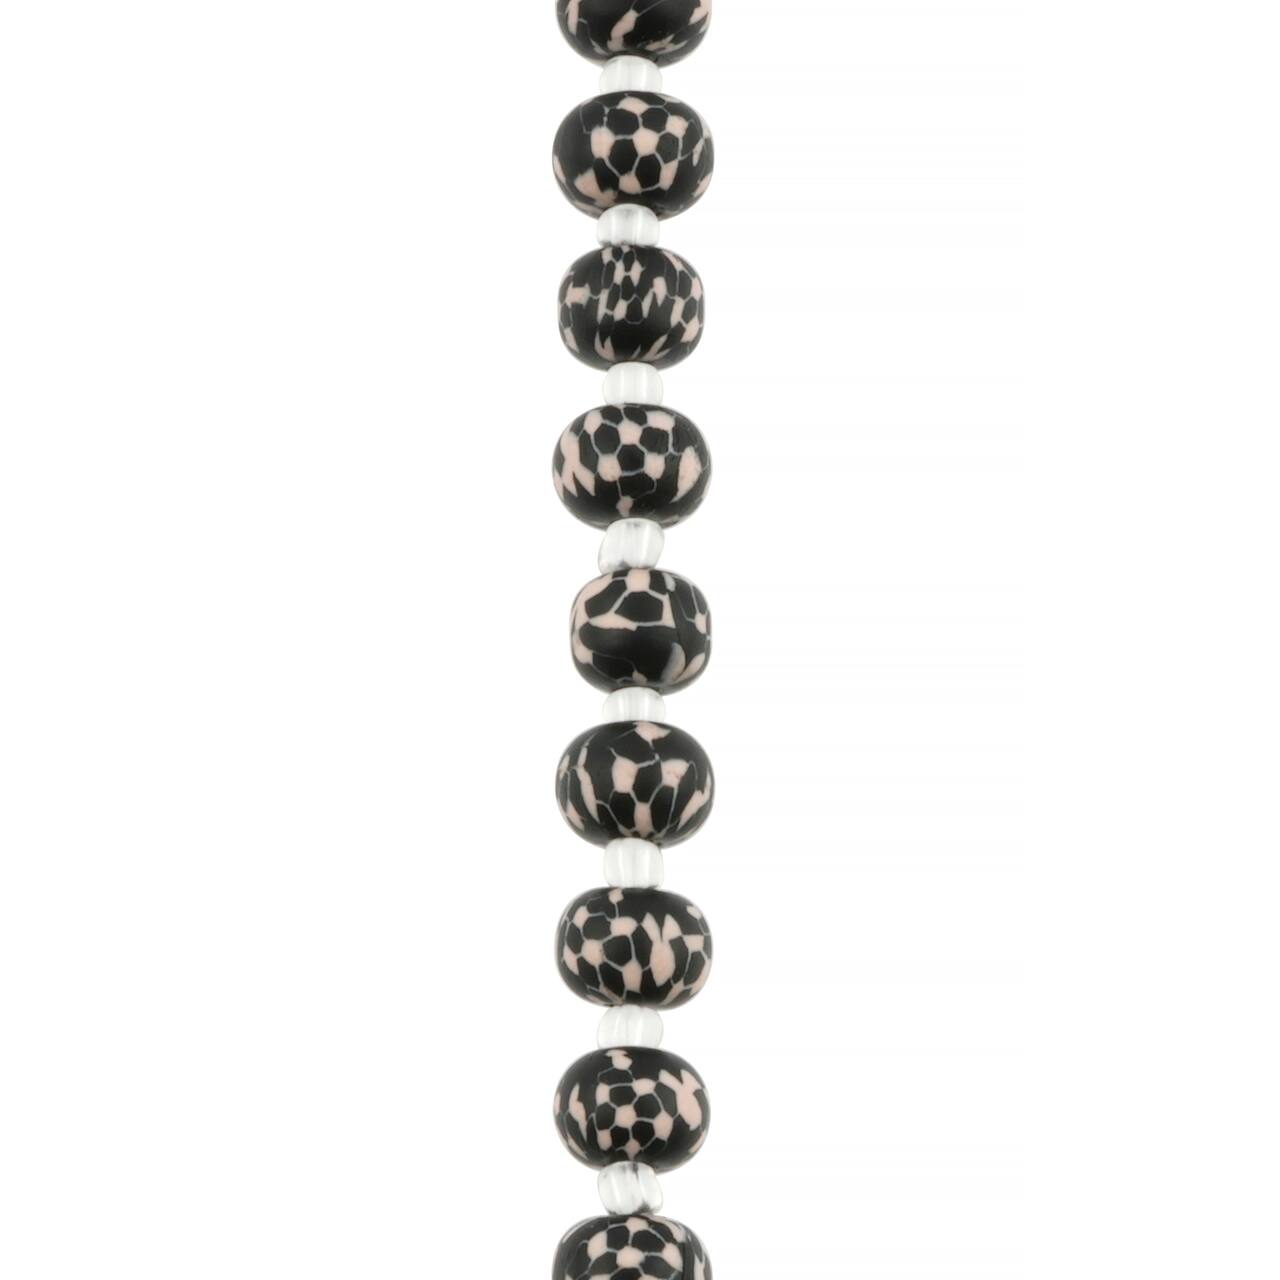 12 Pack: Black & White Clay Round Beads, 10mm by Bead Landing™